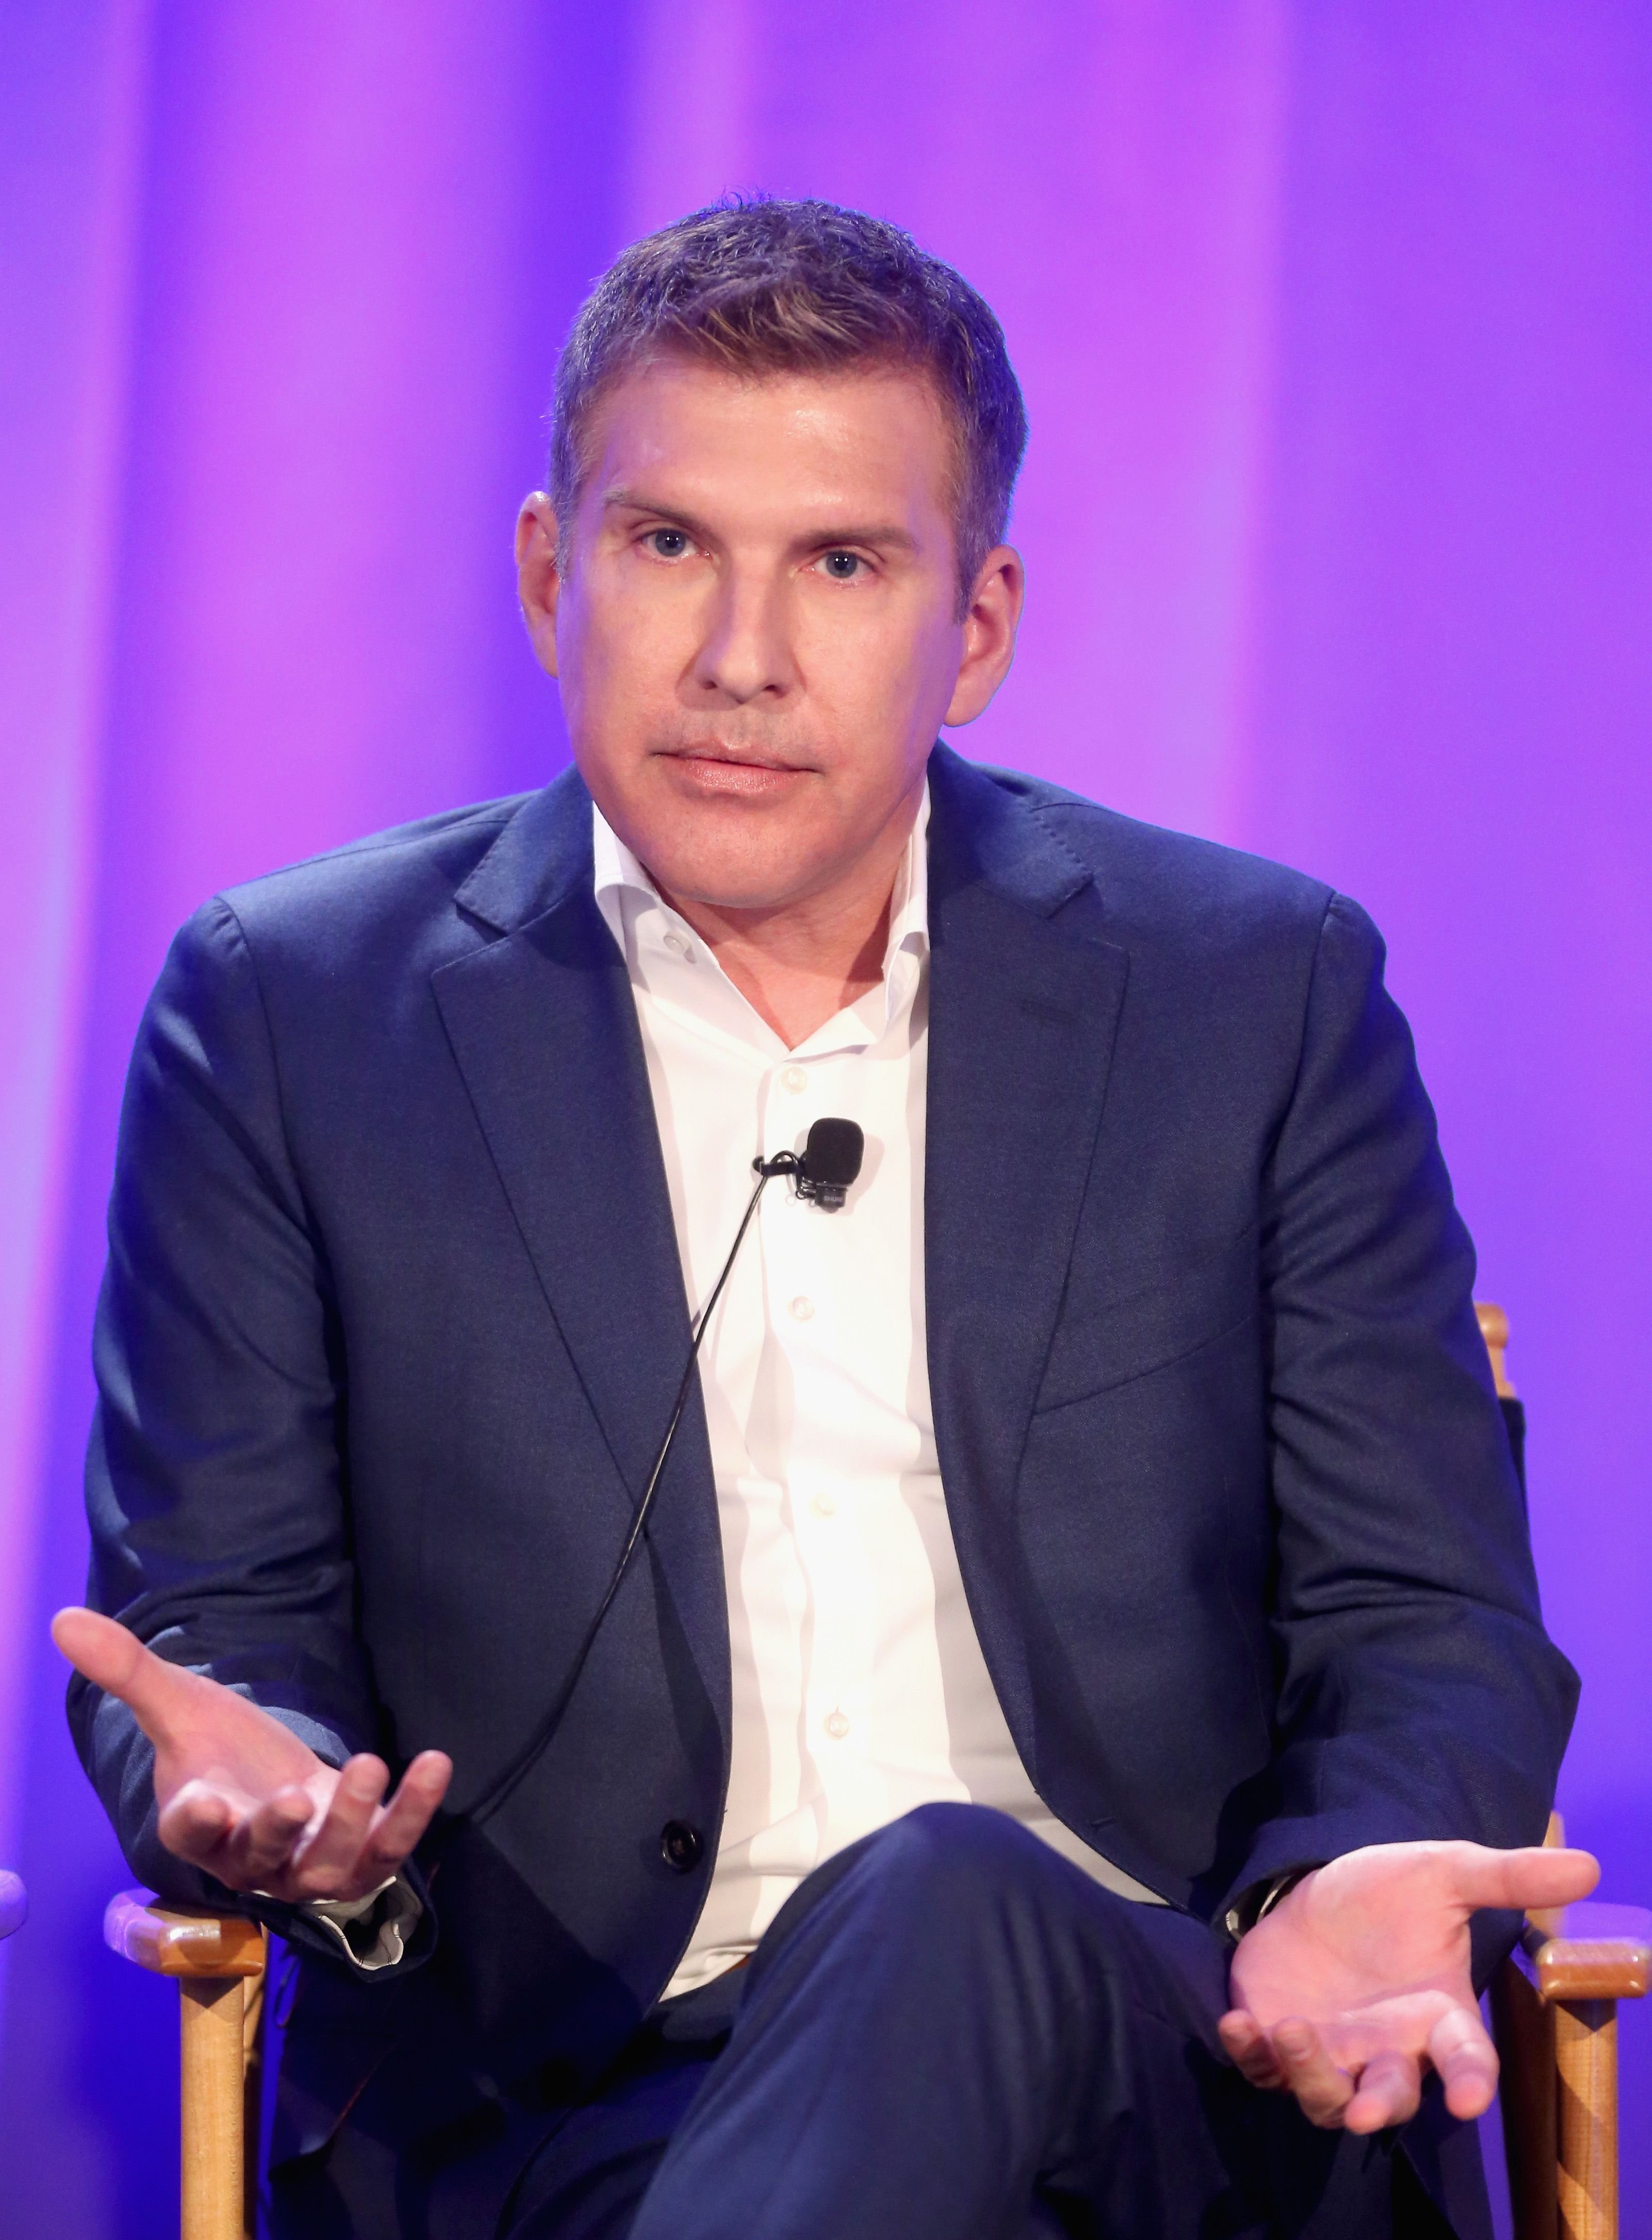 Todd Chrisley during the "Chrisley Knows Best" panel at the 2016 NBCUniversal Summer Press Day at Four Seasons Hotel Westlake Village on April 1, 2016 in Westlake Village, California. | Source: Getty Images